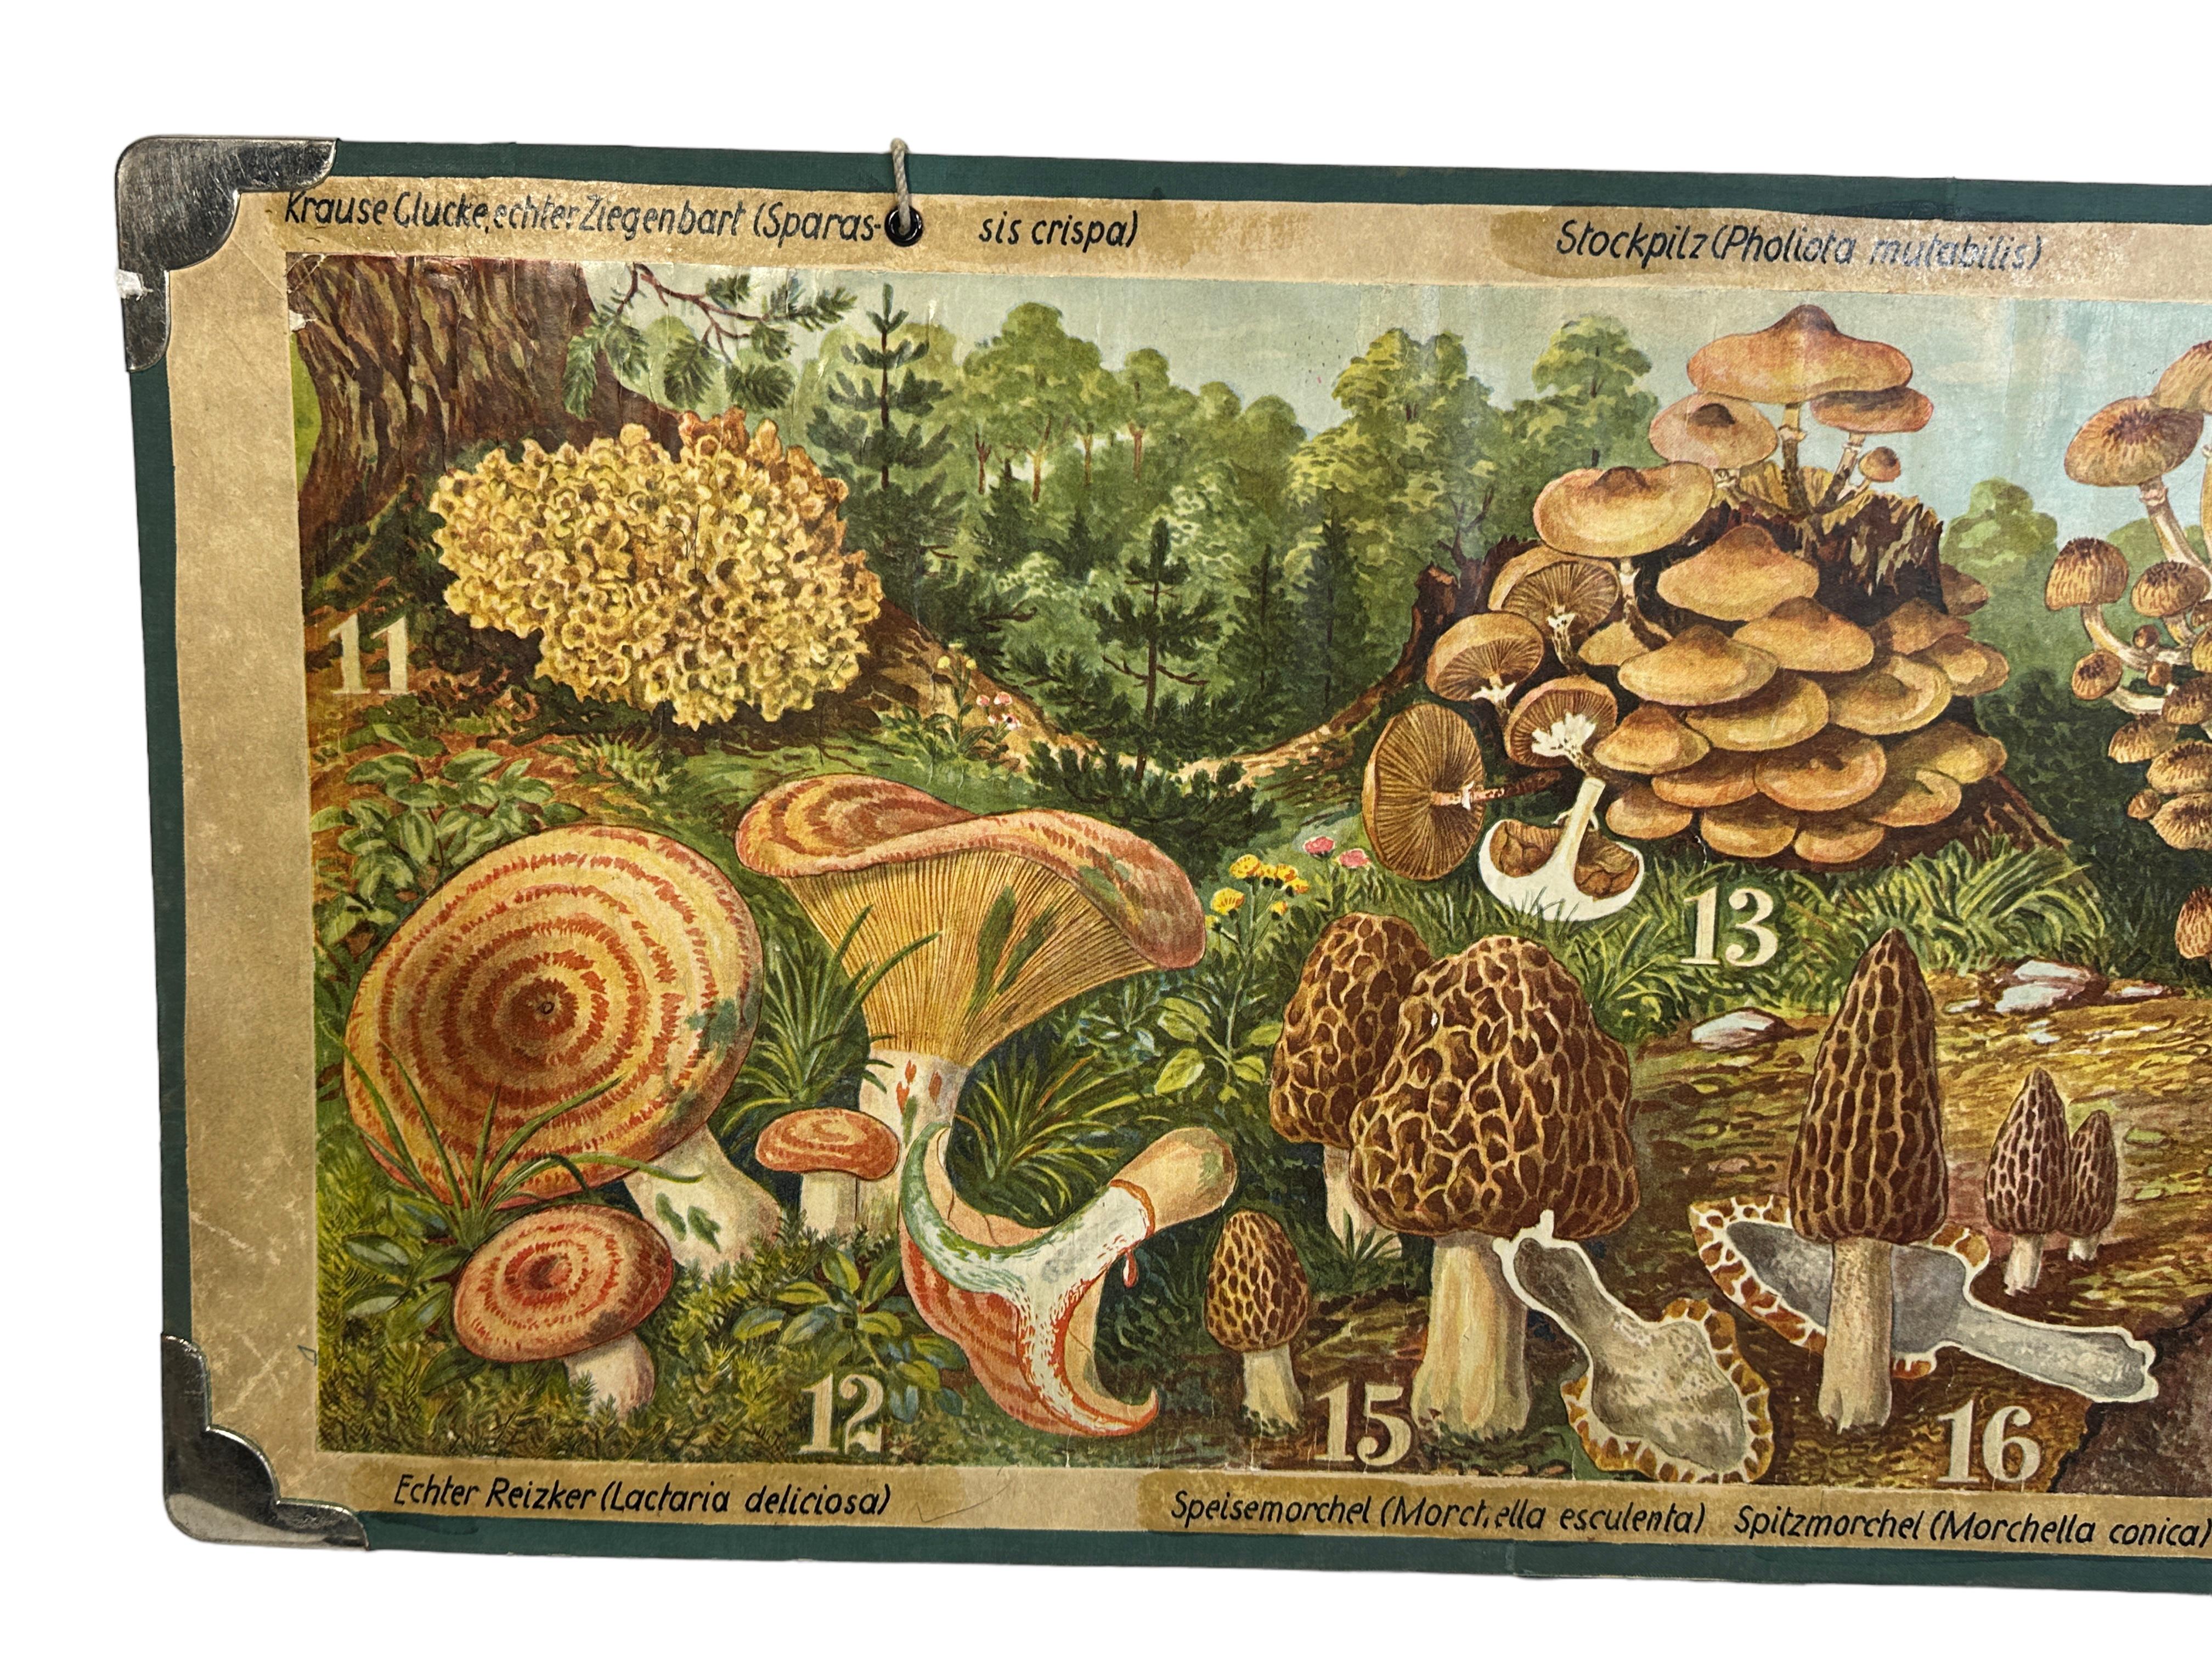 This rare vintage wall chart shows different types of mushrooms, which are native to middle europe. This kind of wall charts are used as teaching material in German schools. Colorful print on reinforced Cardboard. 
This type of learning material is